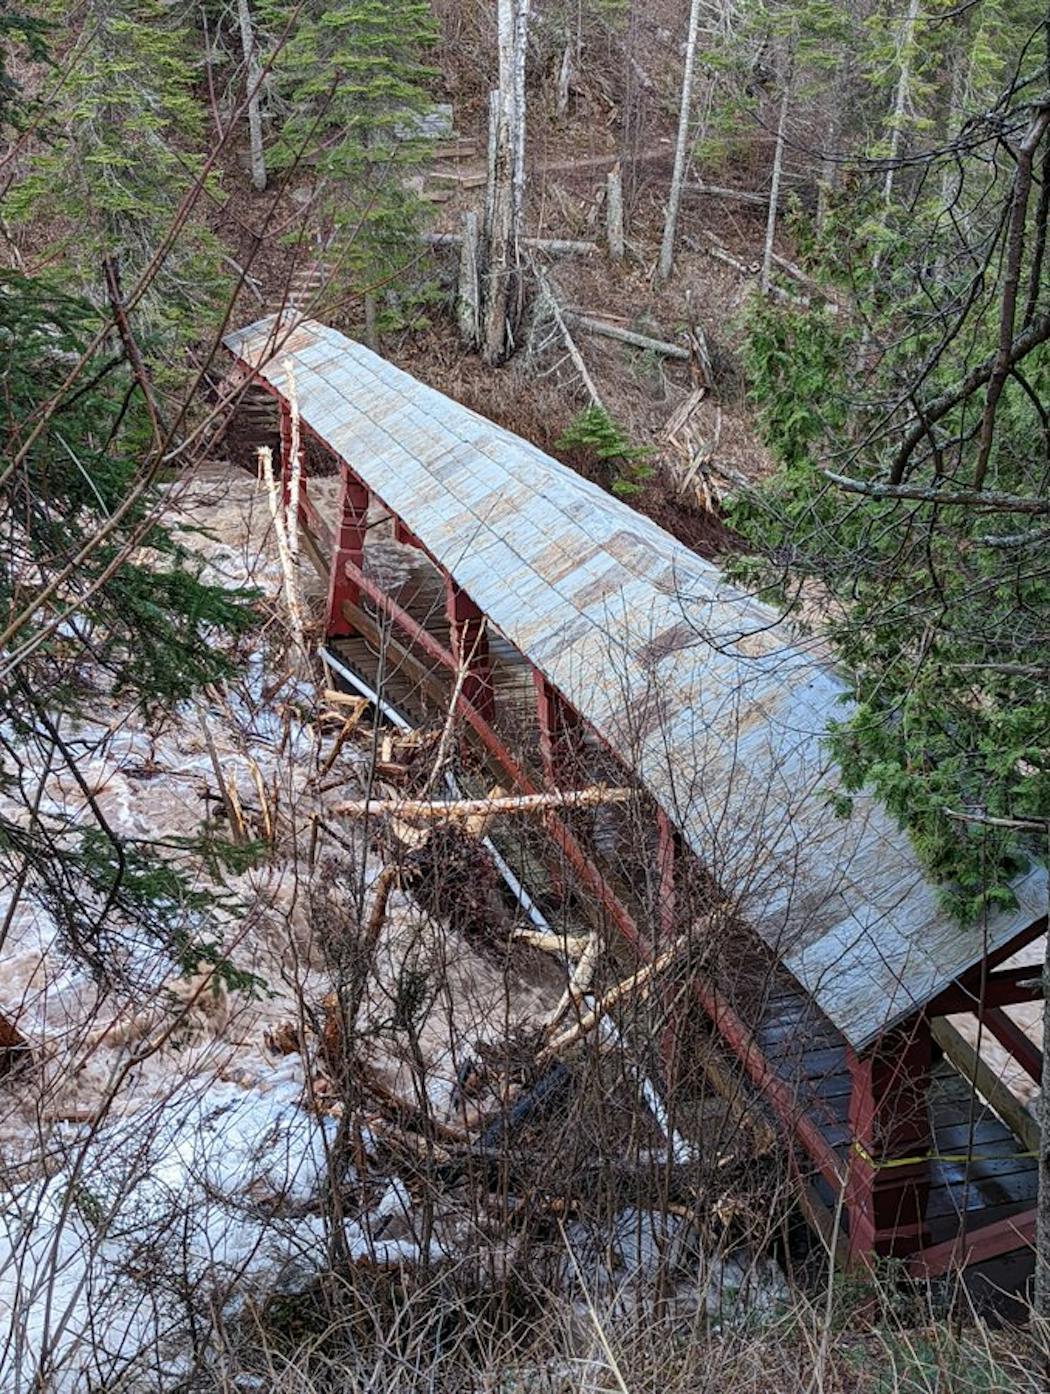 One of the Lutsen Resort's covered bridges Friday, damaged by fallen trees in the Poplar River.